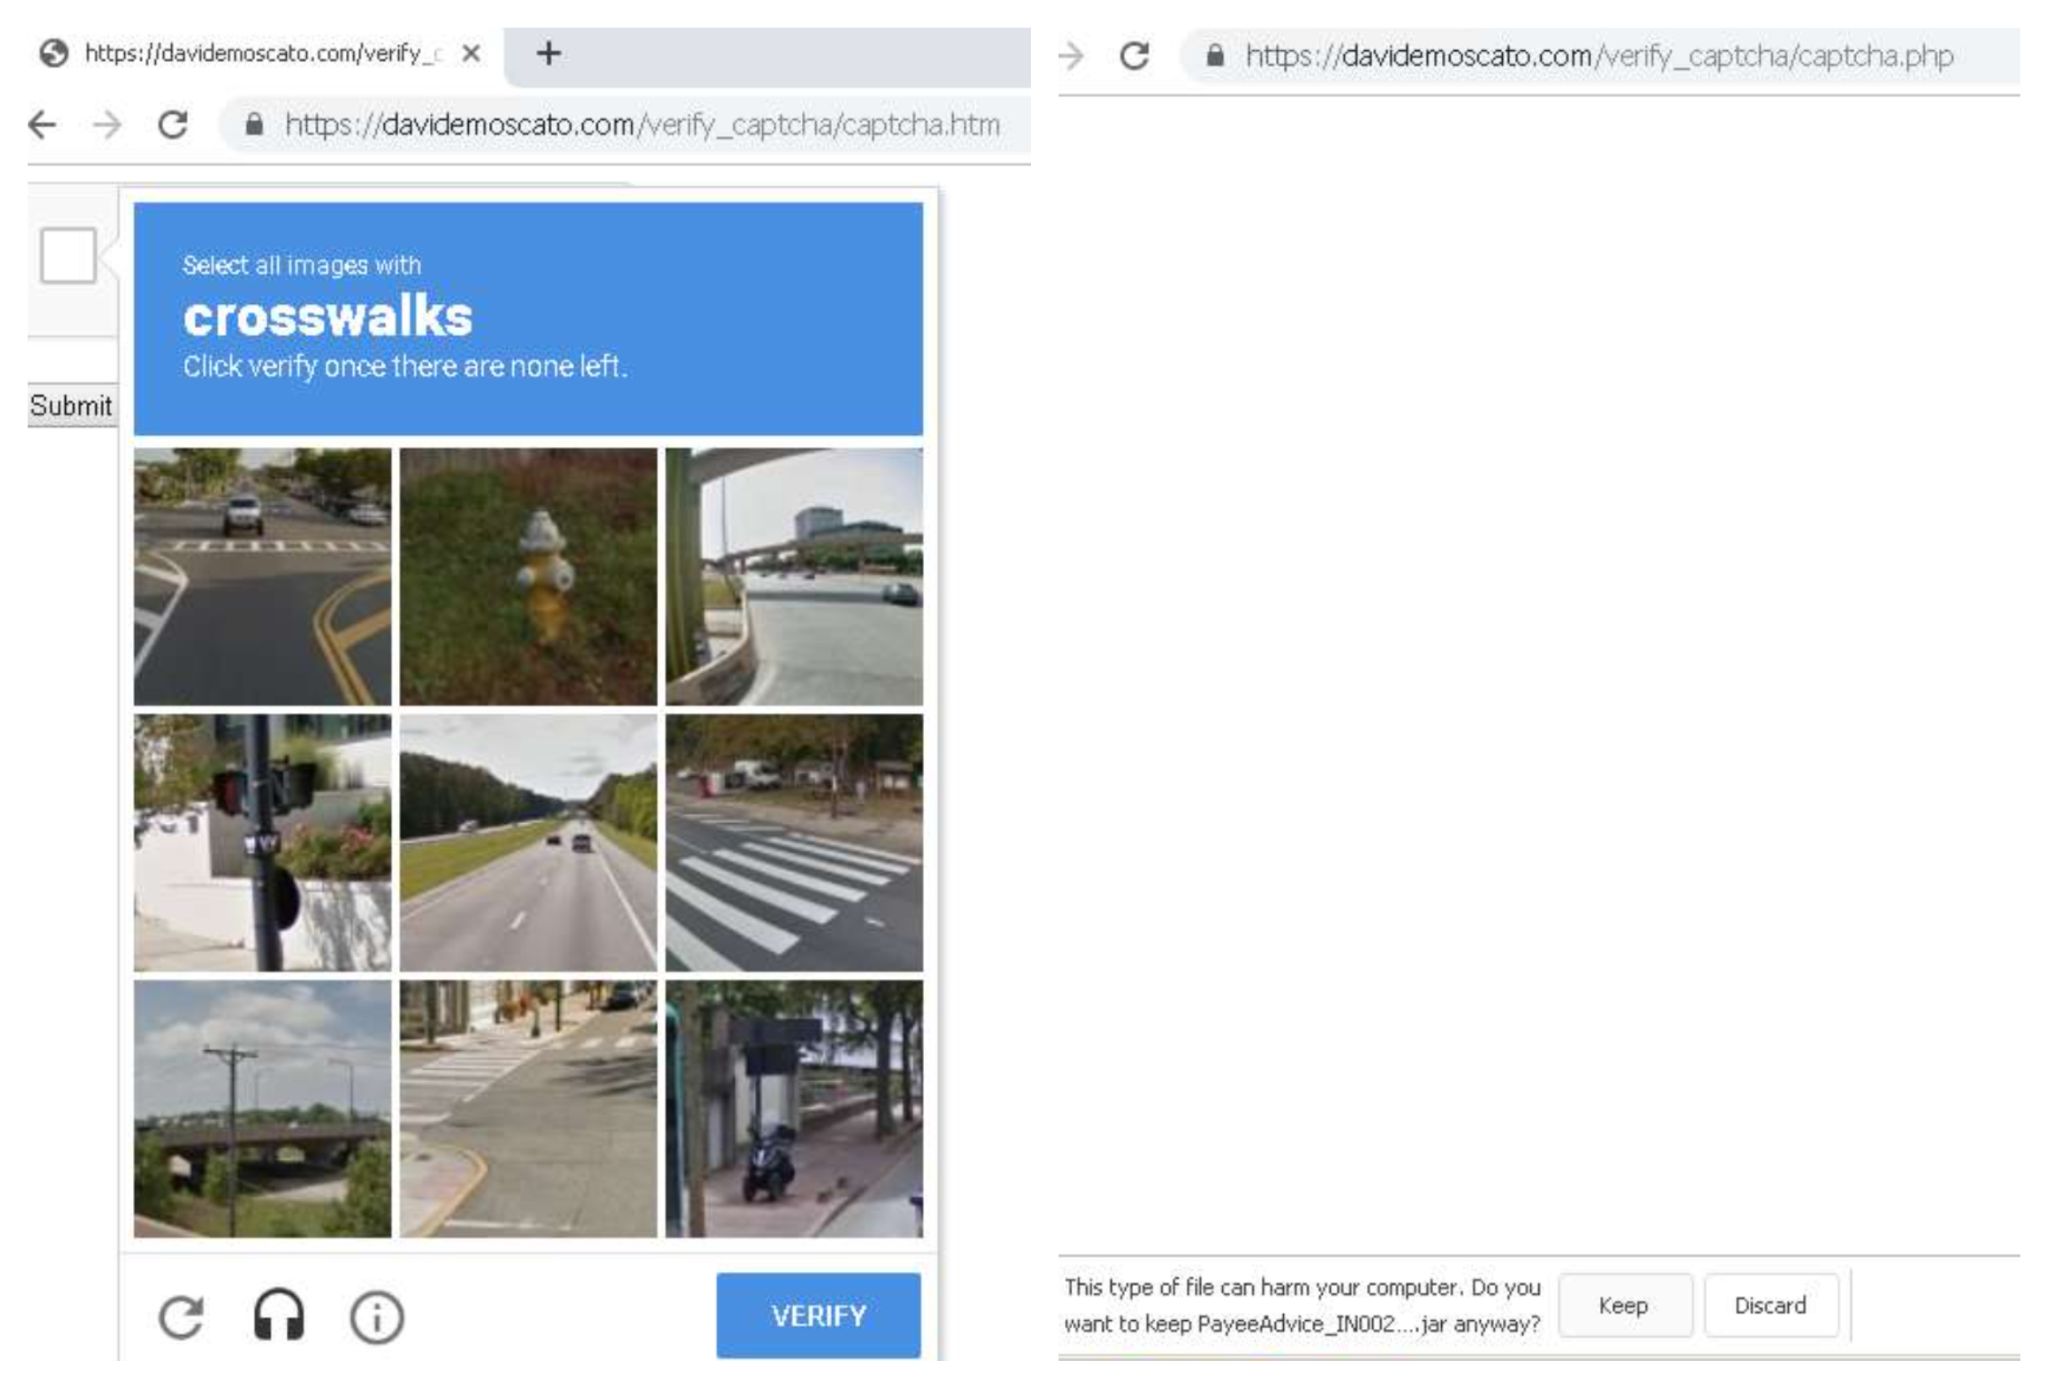 Screenshot of malware hidden behind a verification page asking users to select all images with crosswalks.